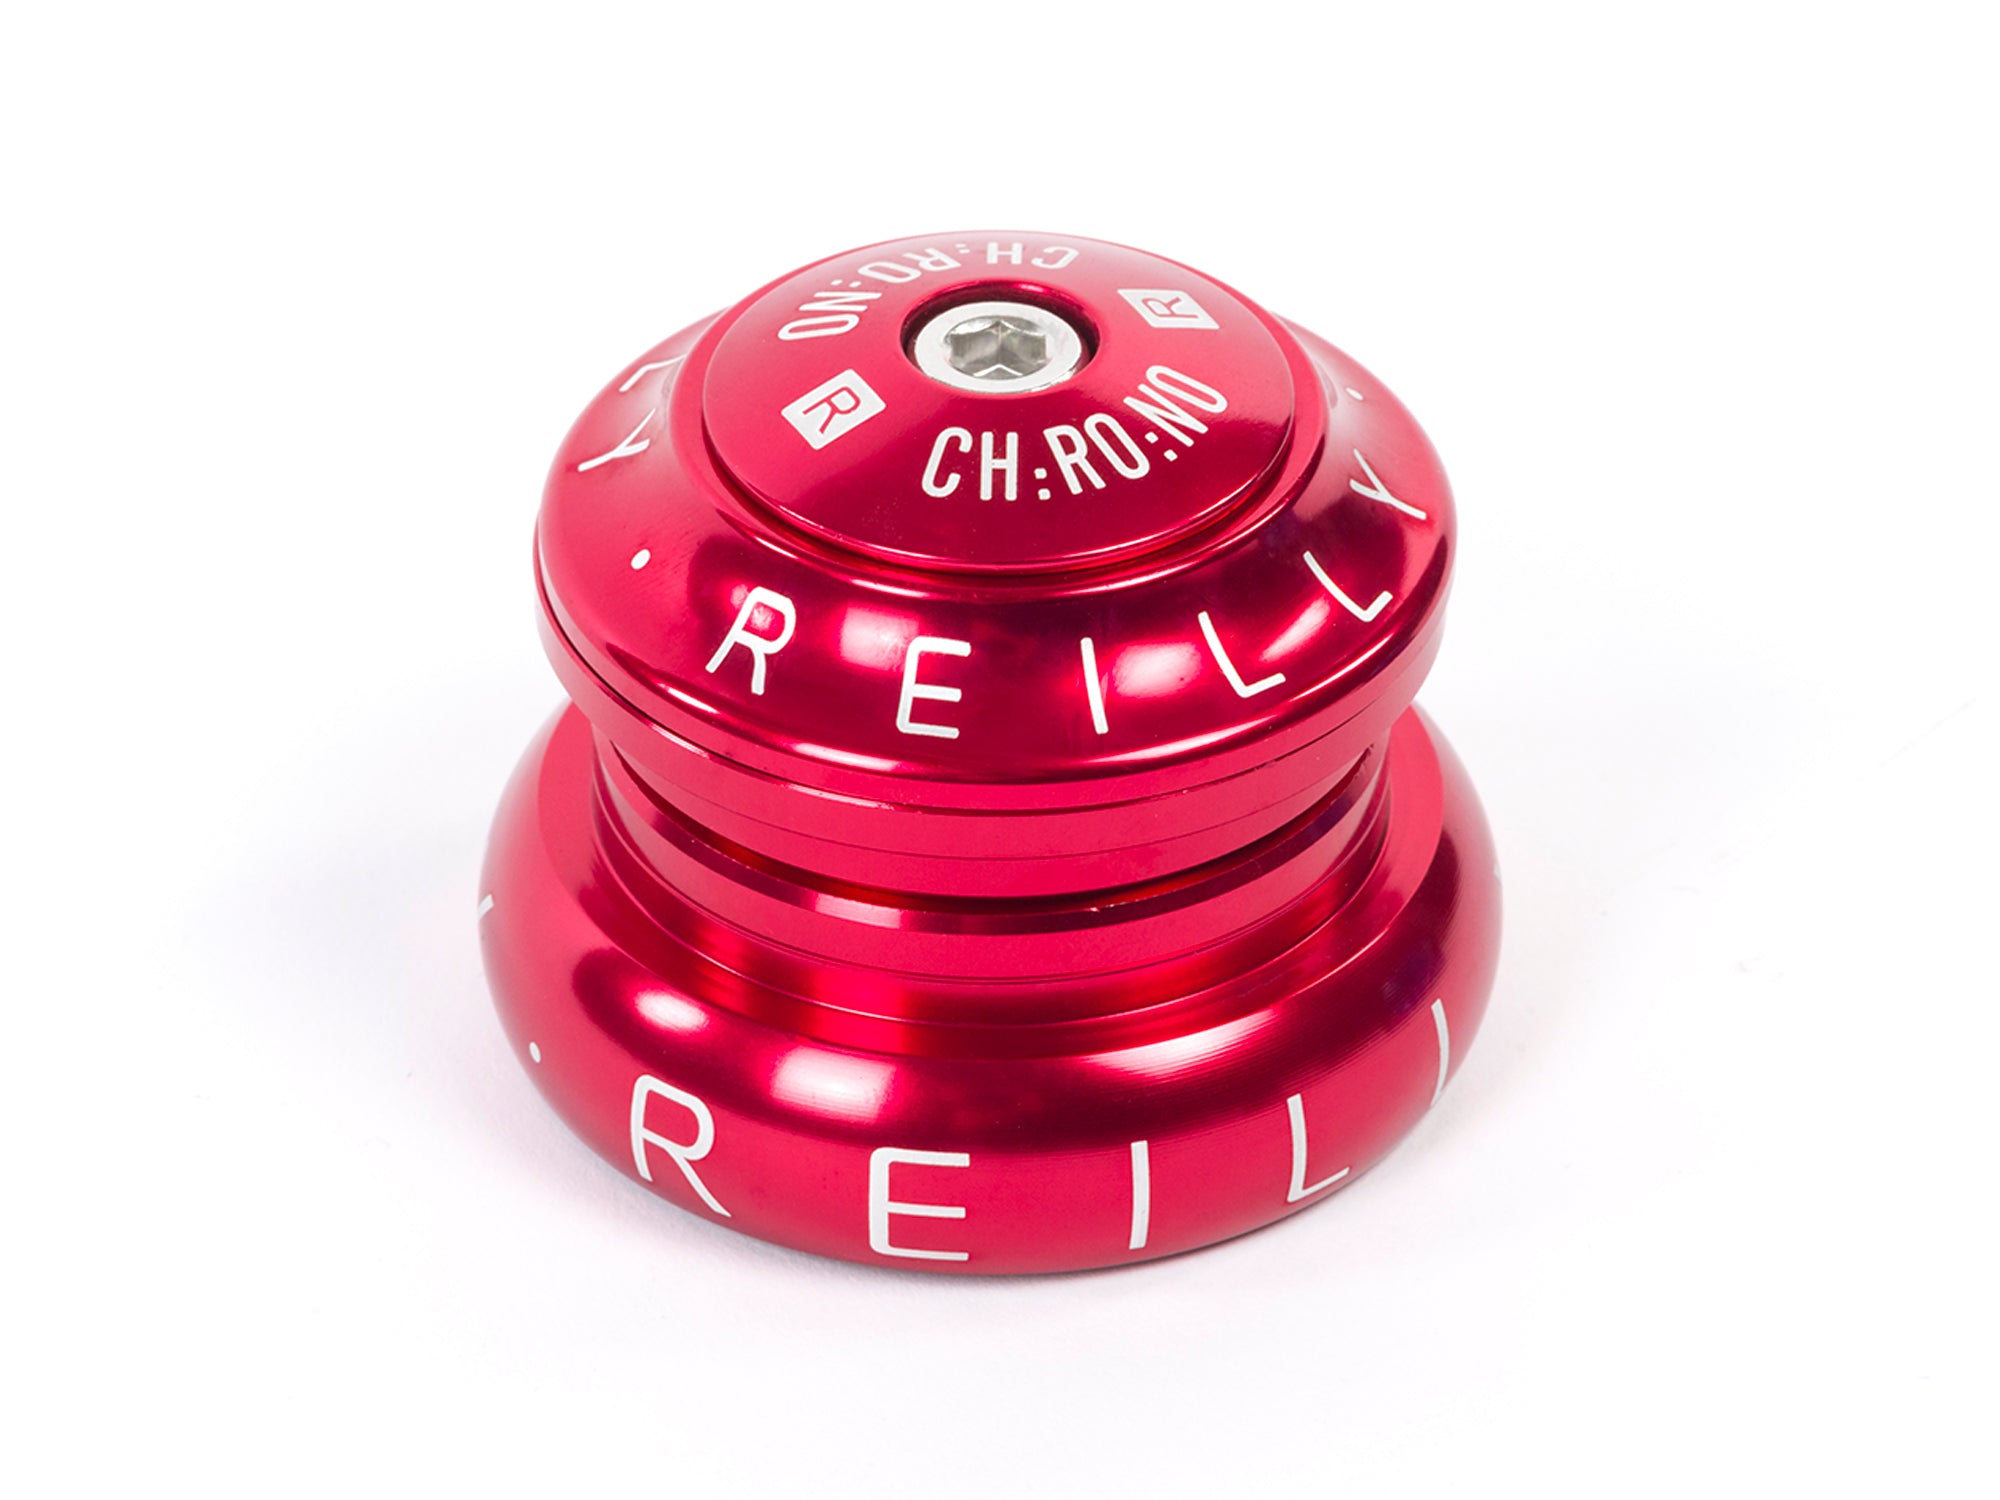 Red Reilly Headset.